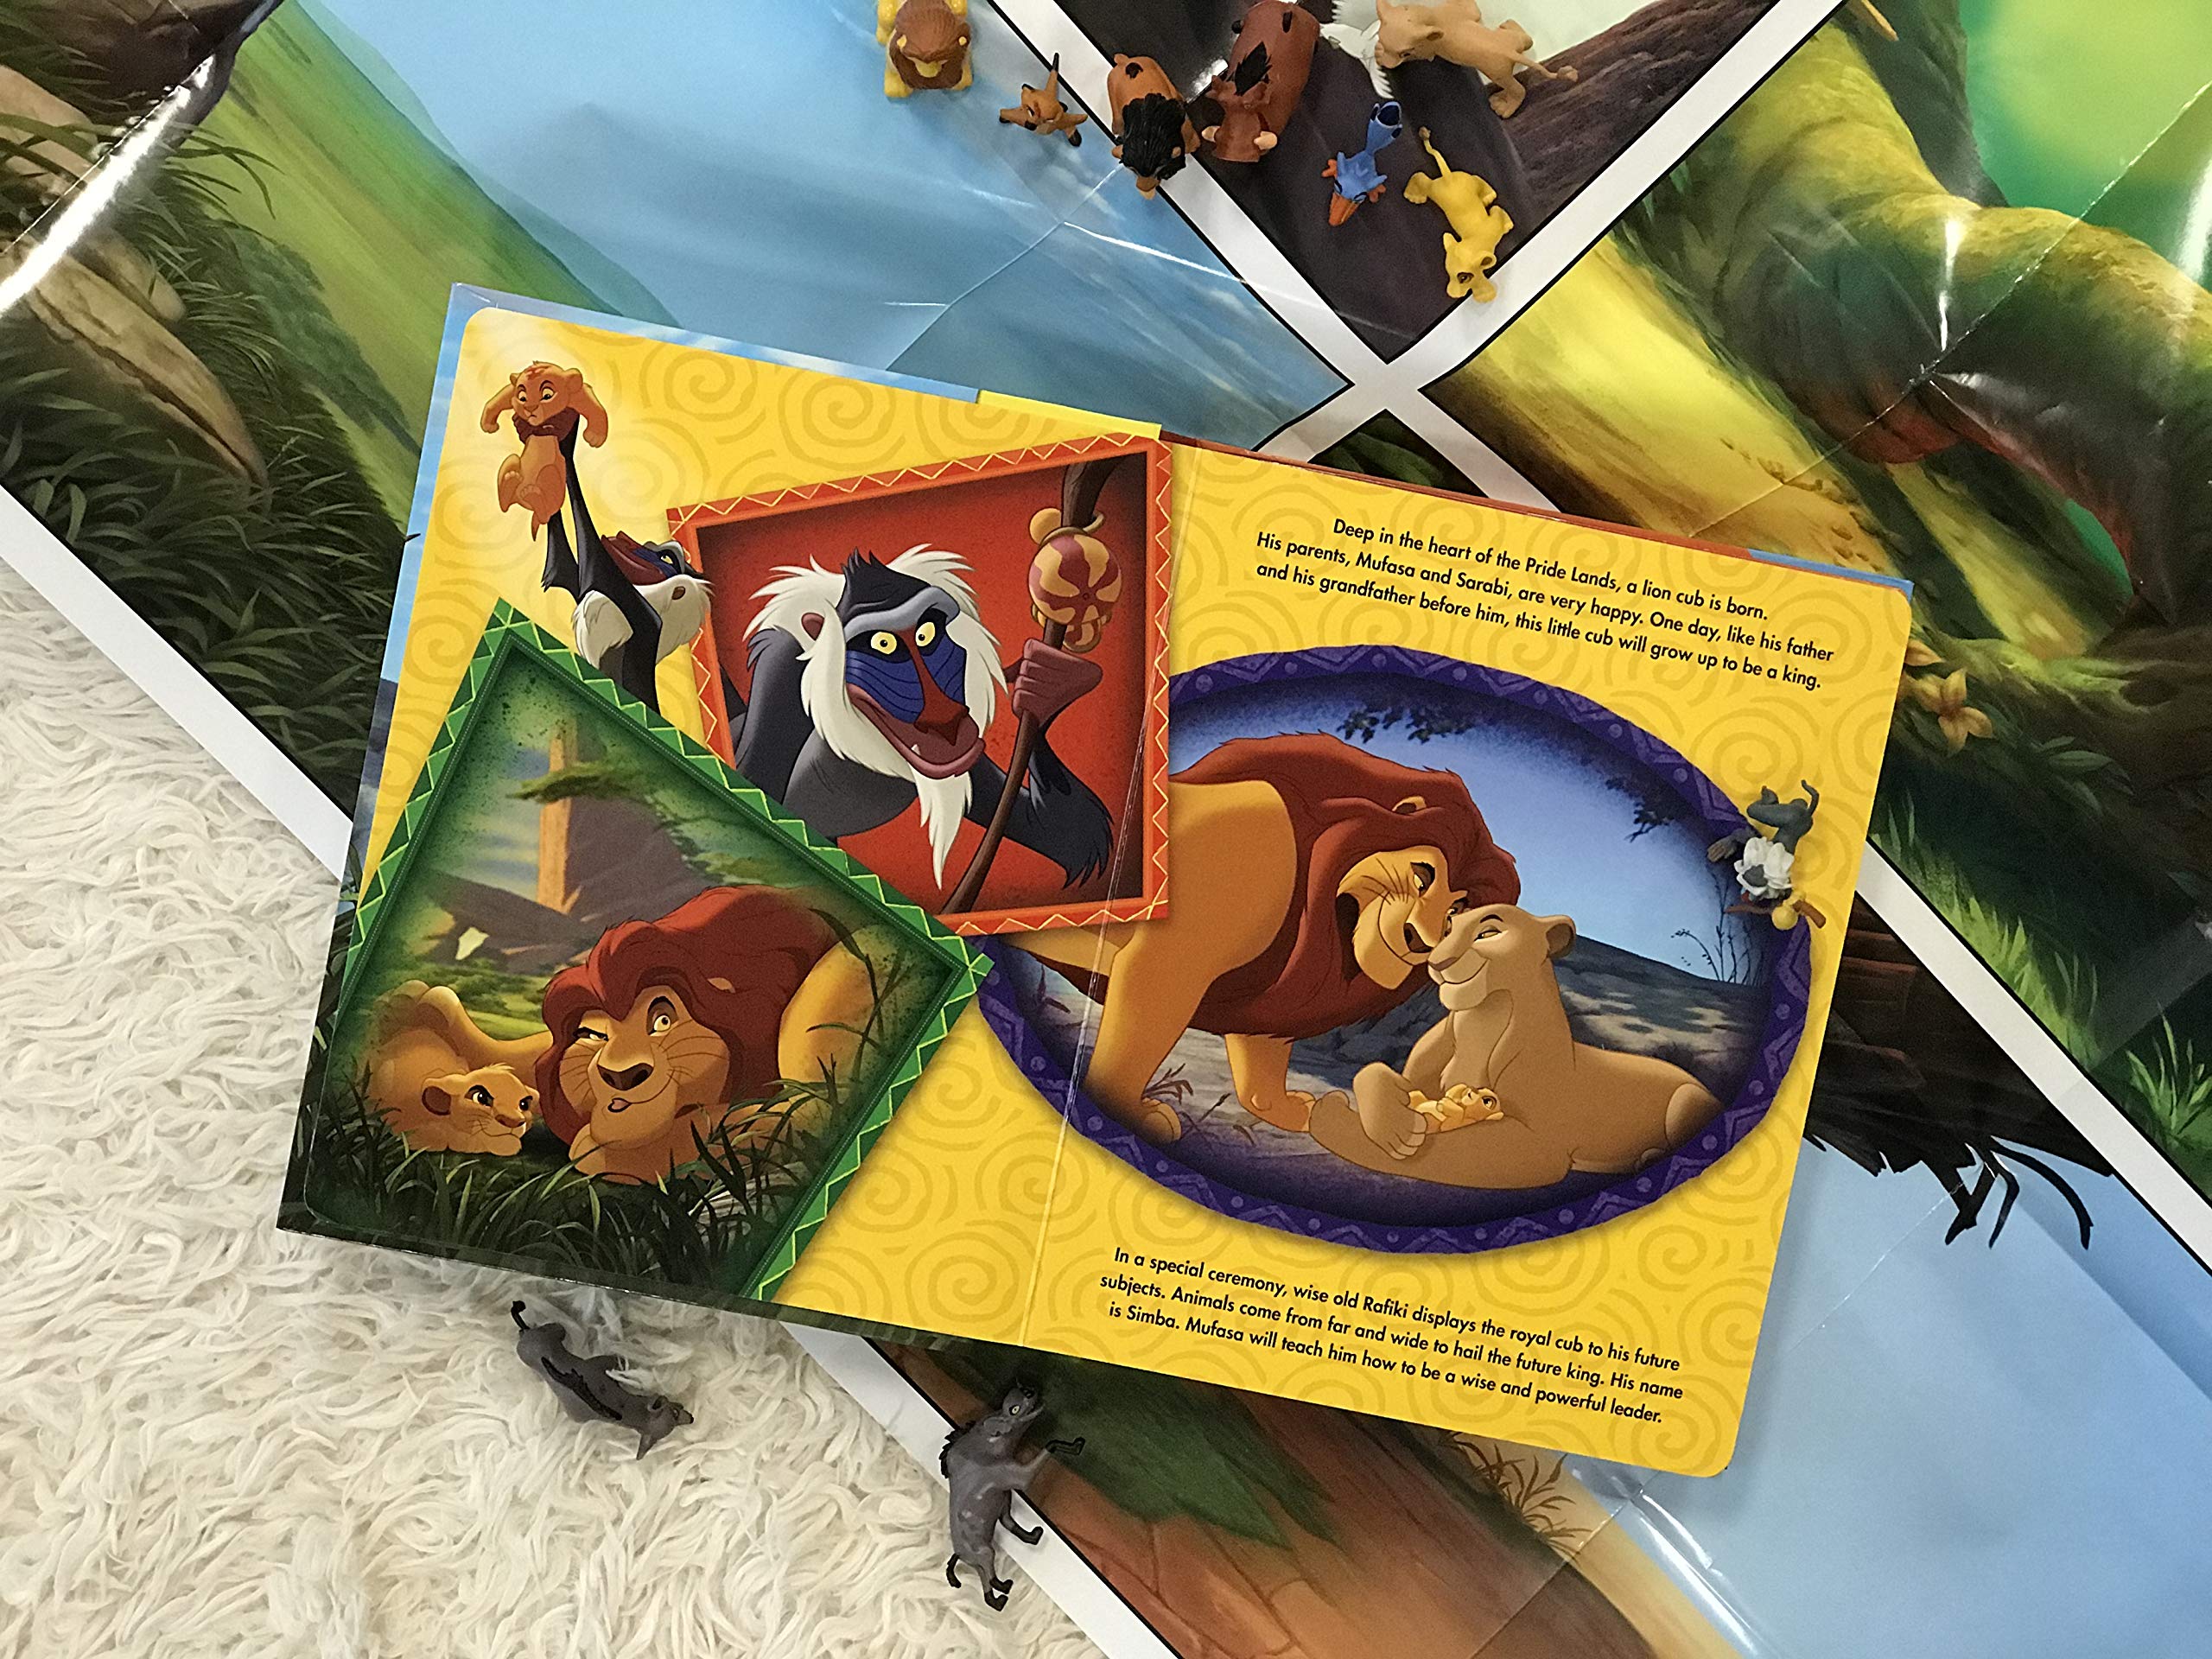 Phidal - Disney Lion King My Busy Books - 10 Figurines and a Playmat